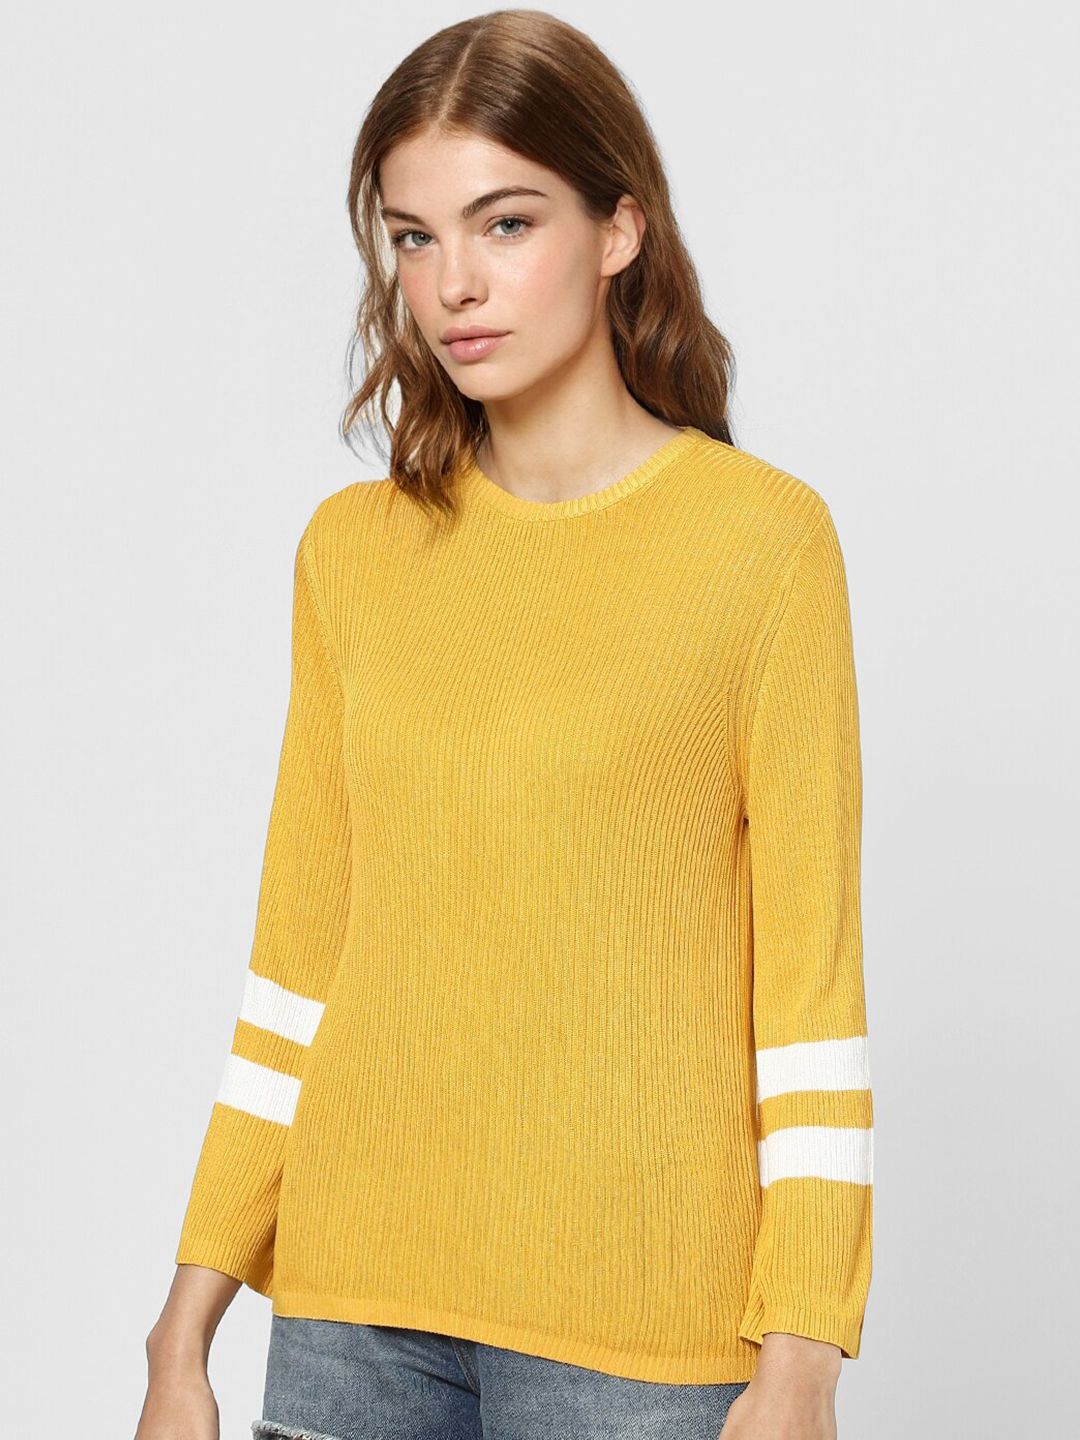 ONLY Women Yellow & White Colourblocked Pullover Price in India